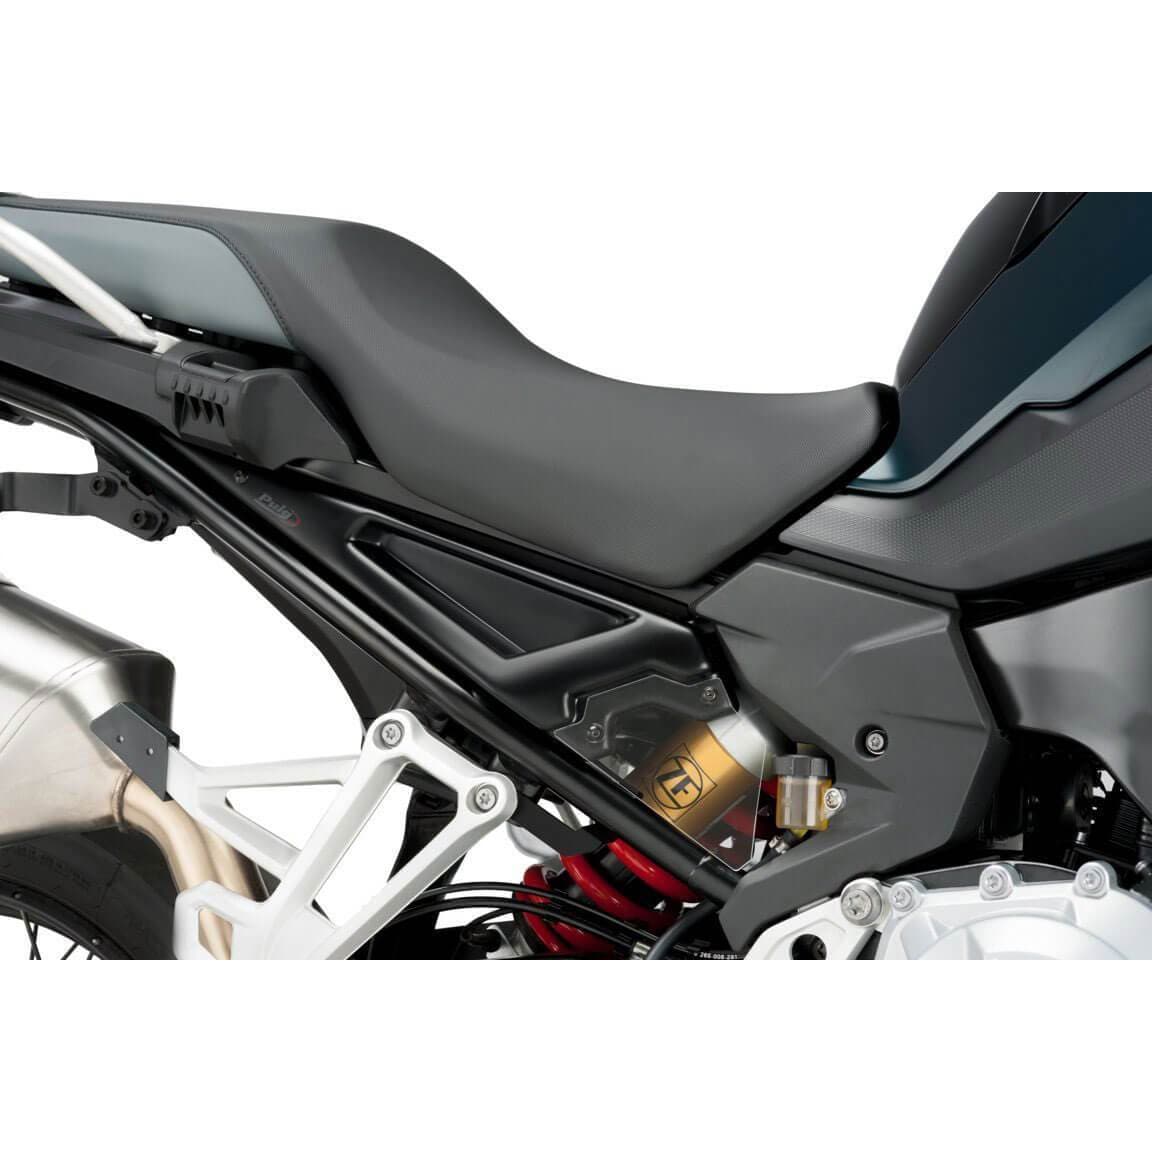 Puig Infill Panels | Black | BMW F750 GS 2018>Current-M9791J-Infill Panels-Pyramid Motorcycle Accessories